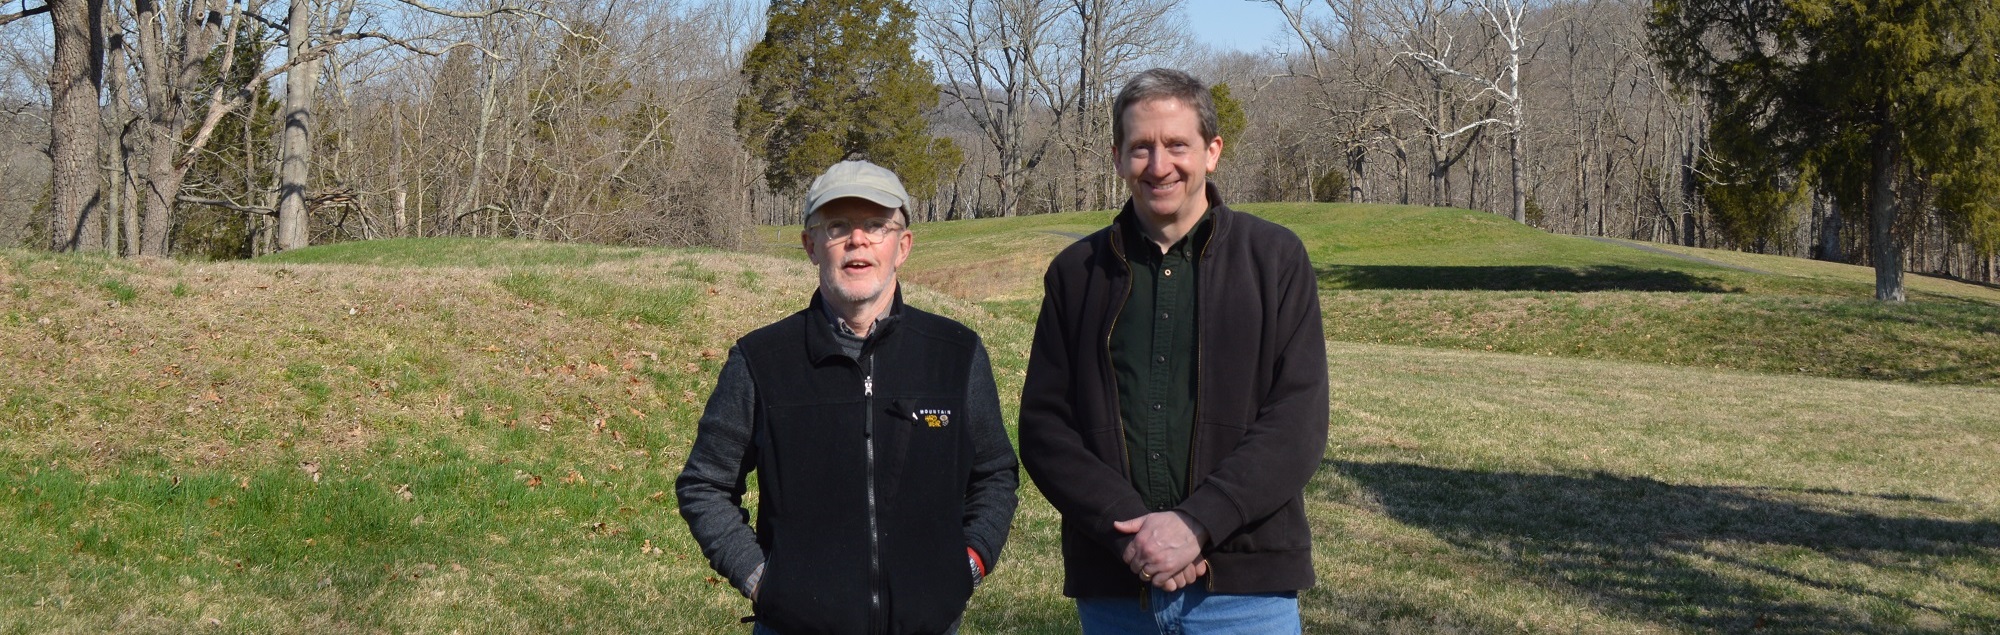 Noah Adams (left) and Brad Lepper standing in front of the Serpent Mound